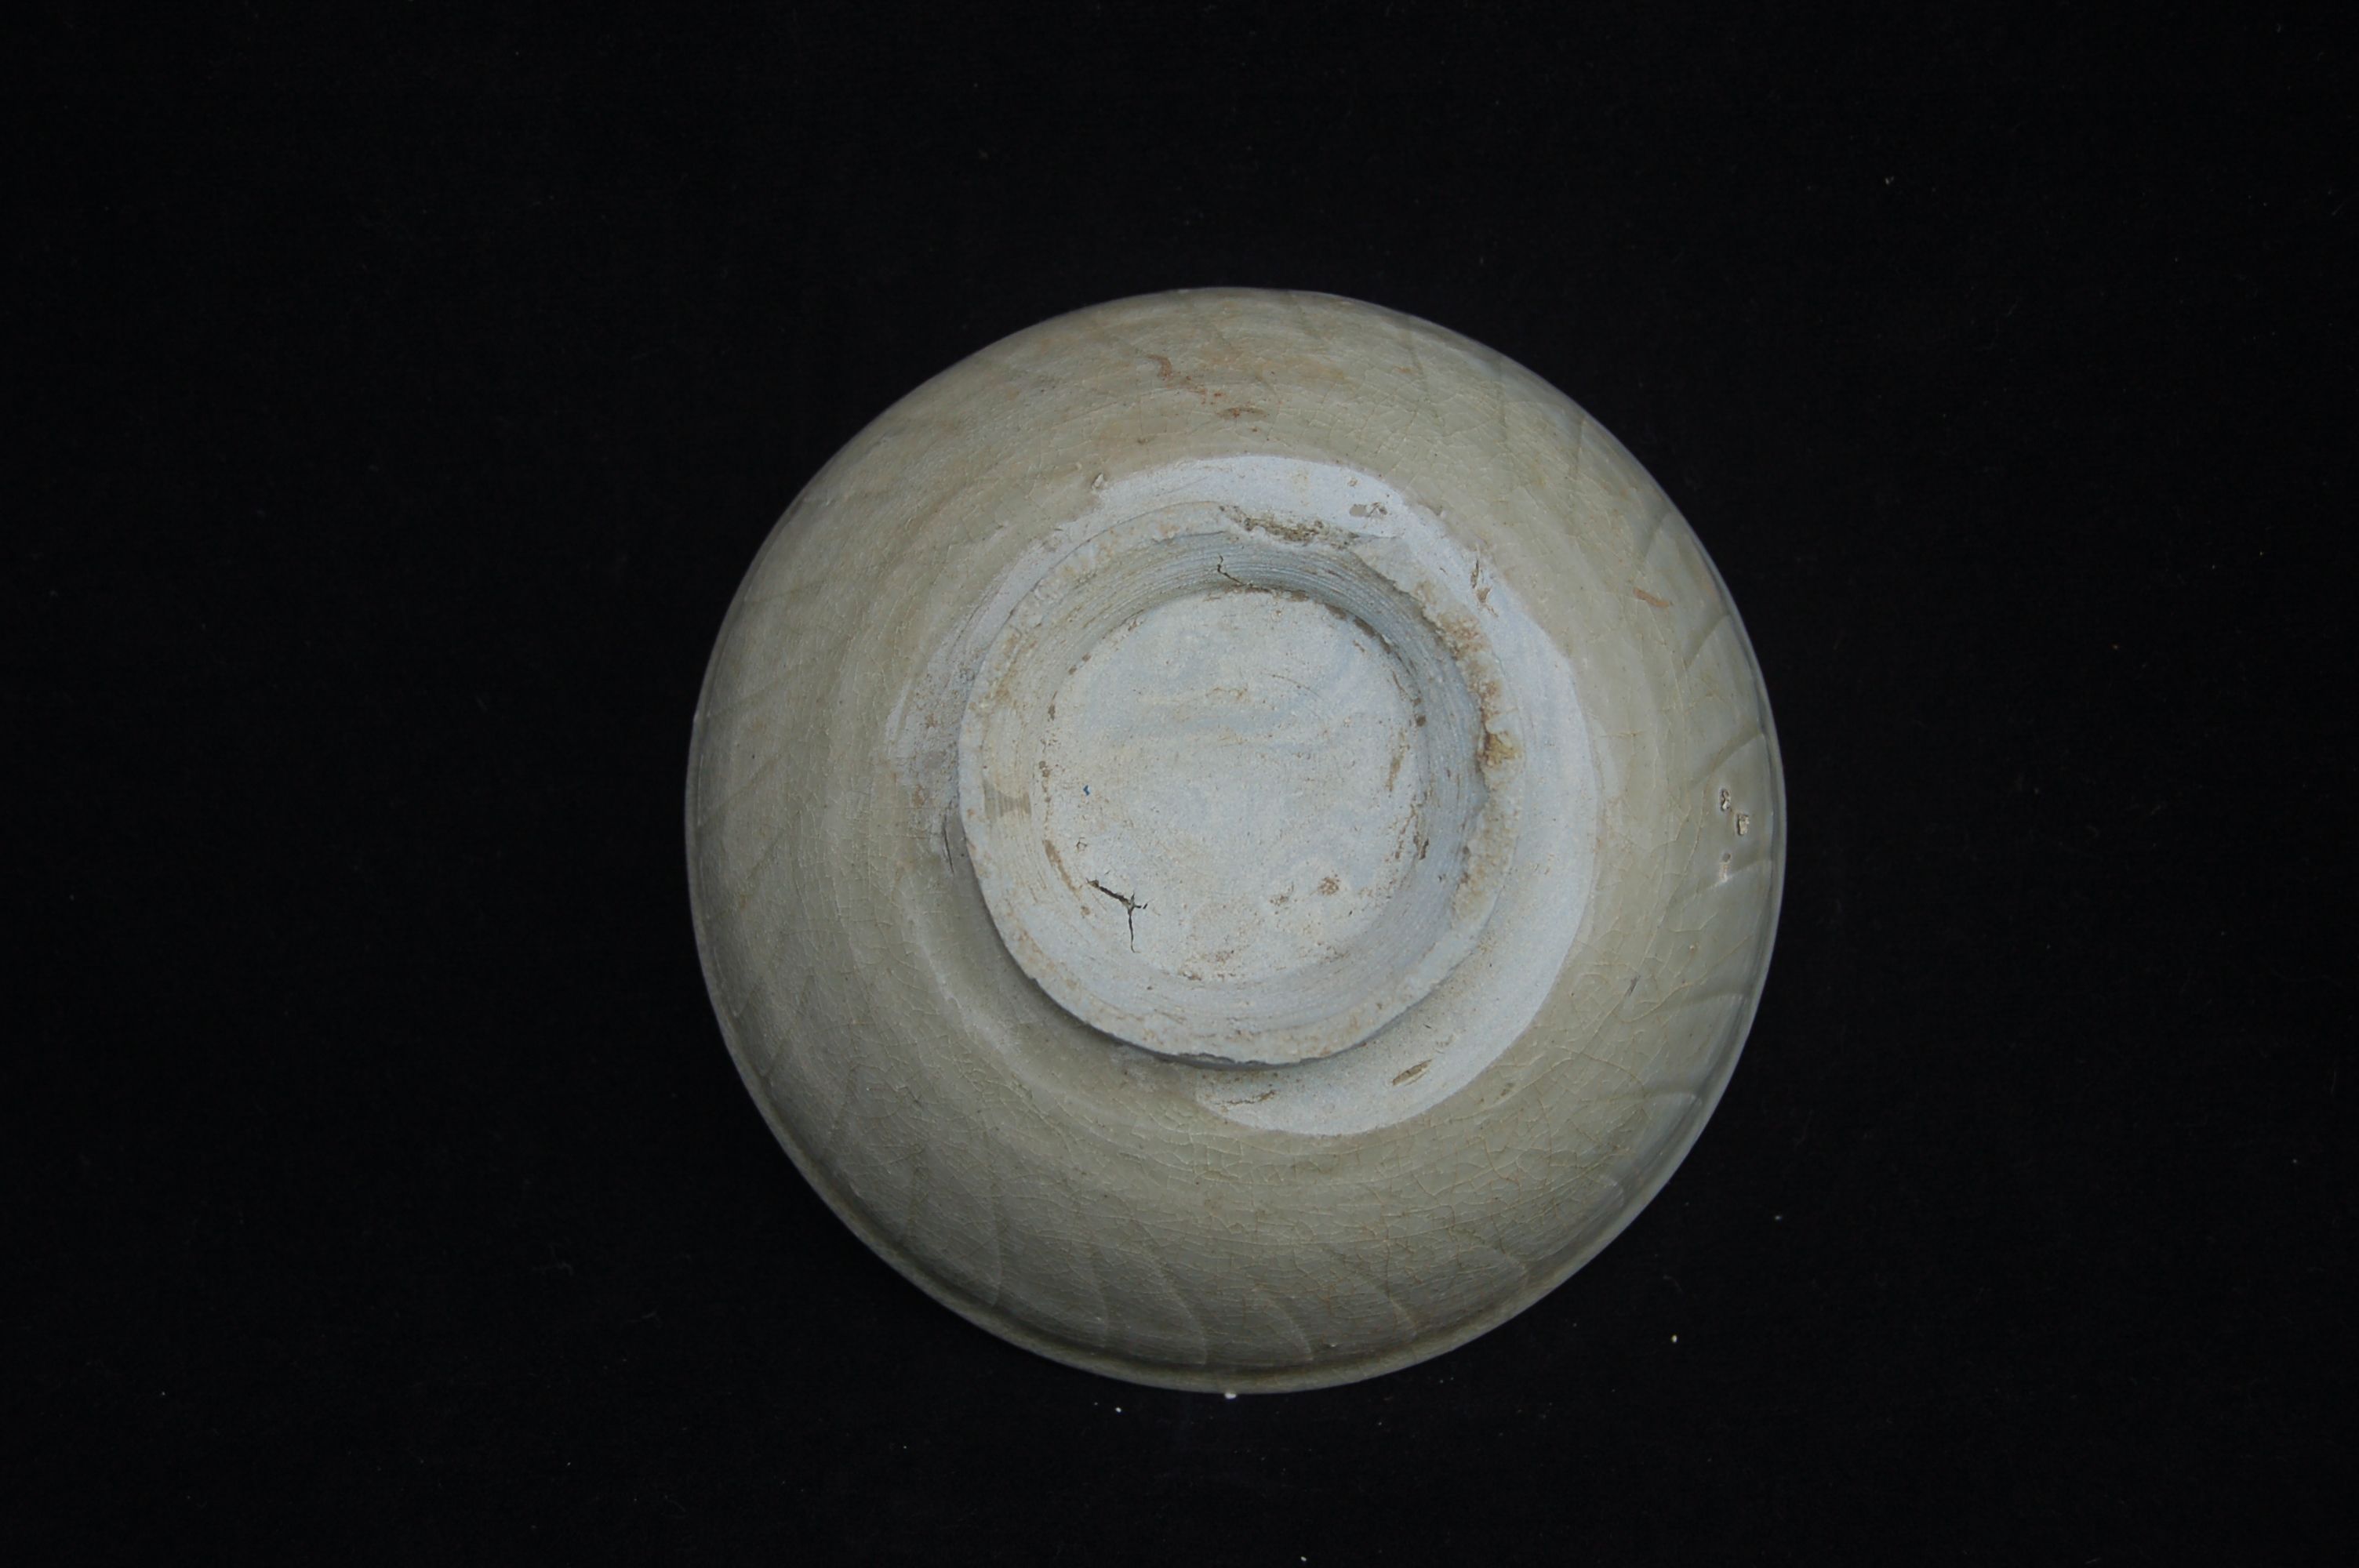 Small bowl with slightly everted rim, rounded wall with incised striations, on a high carved foot-ring. Diameter 12 cm, height 5 cm.